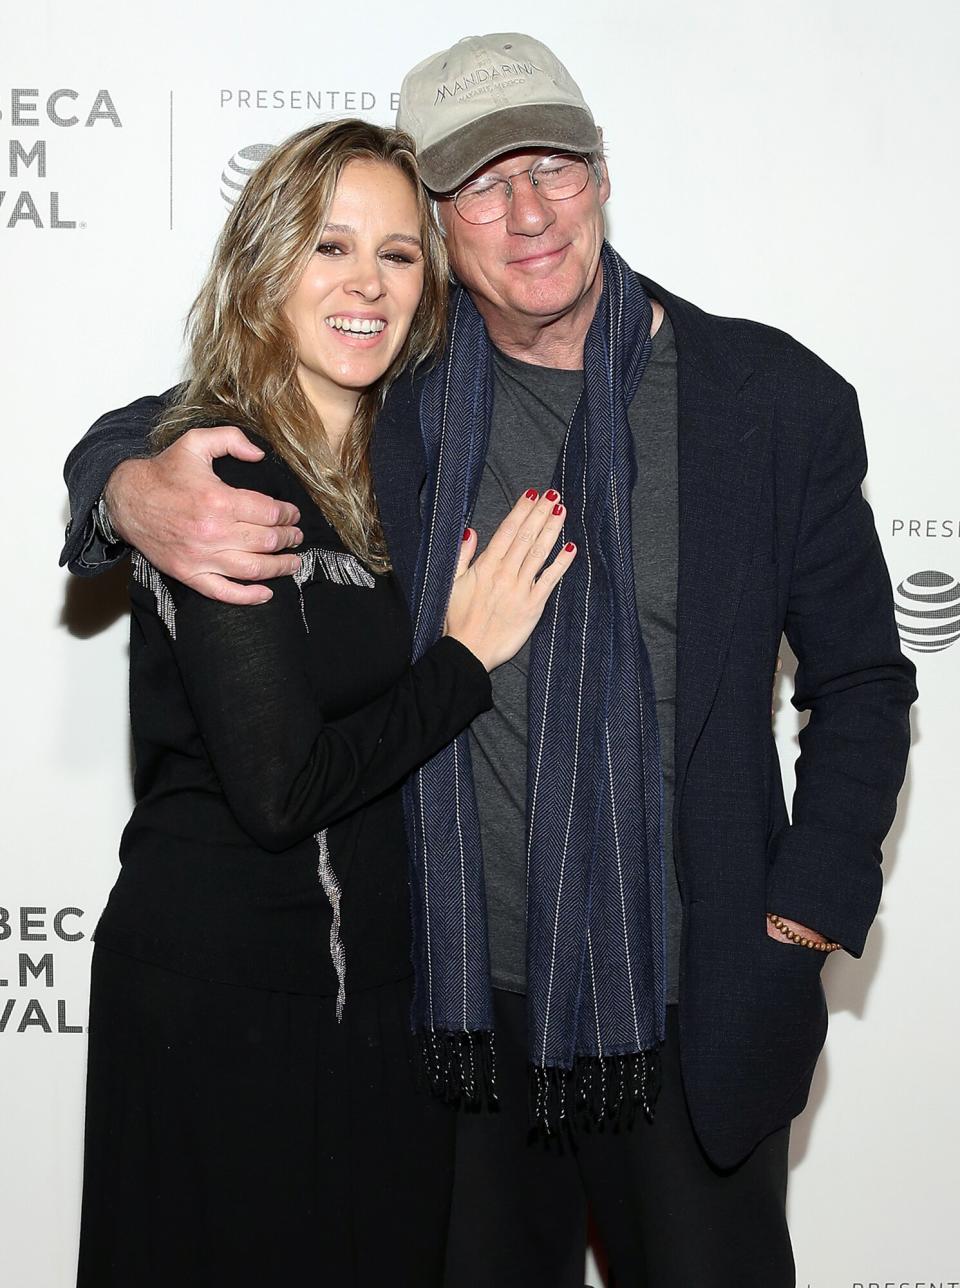 Alejandra Silva and Richard Gere attend the "It Takes A Lunatic" world premiere during the 2019 Tribeca Film Festival at BMCC Tribeca PAC on May 03, 2019 in New York City